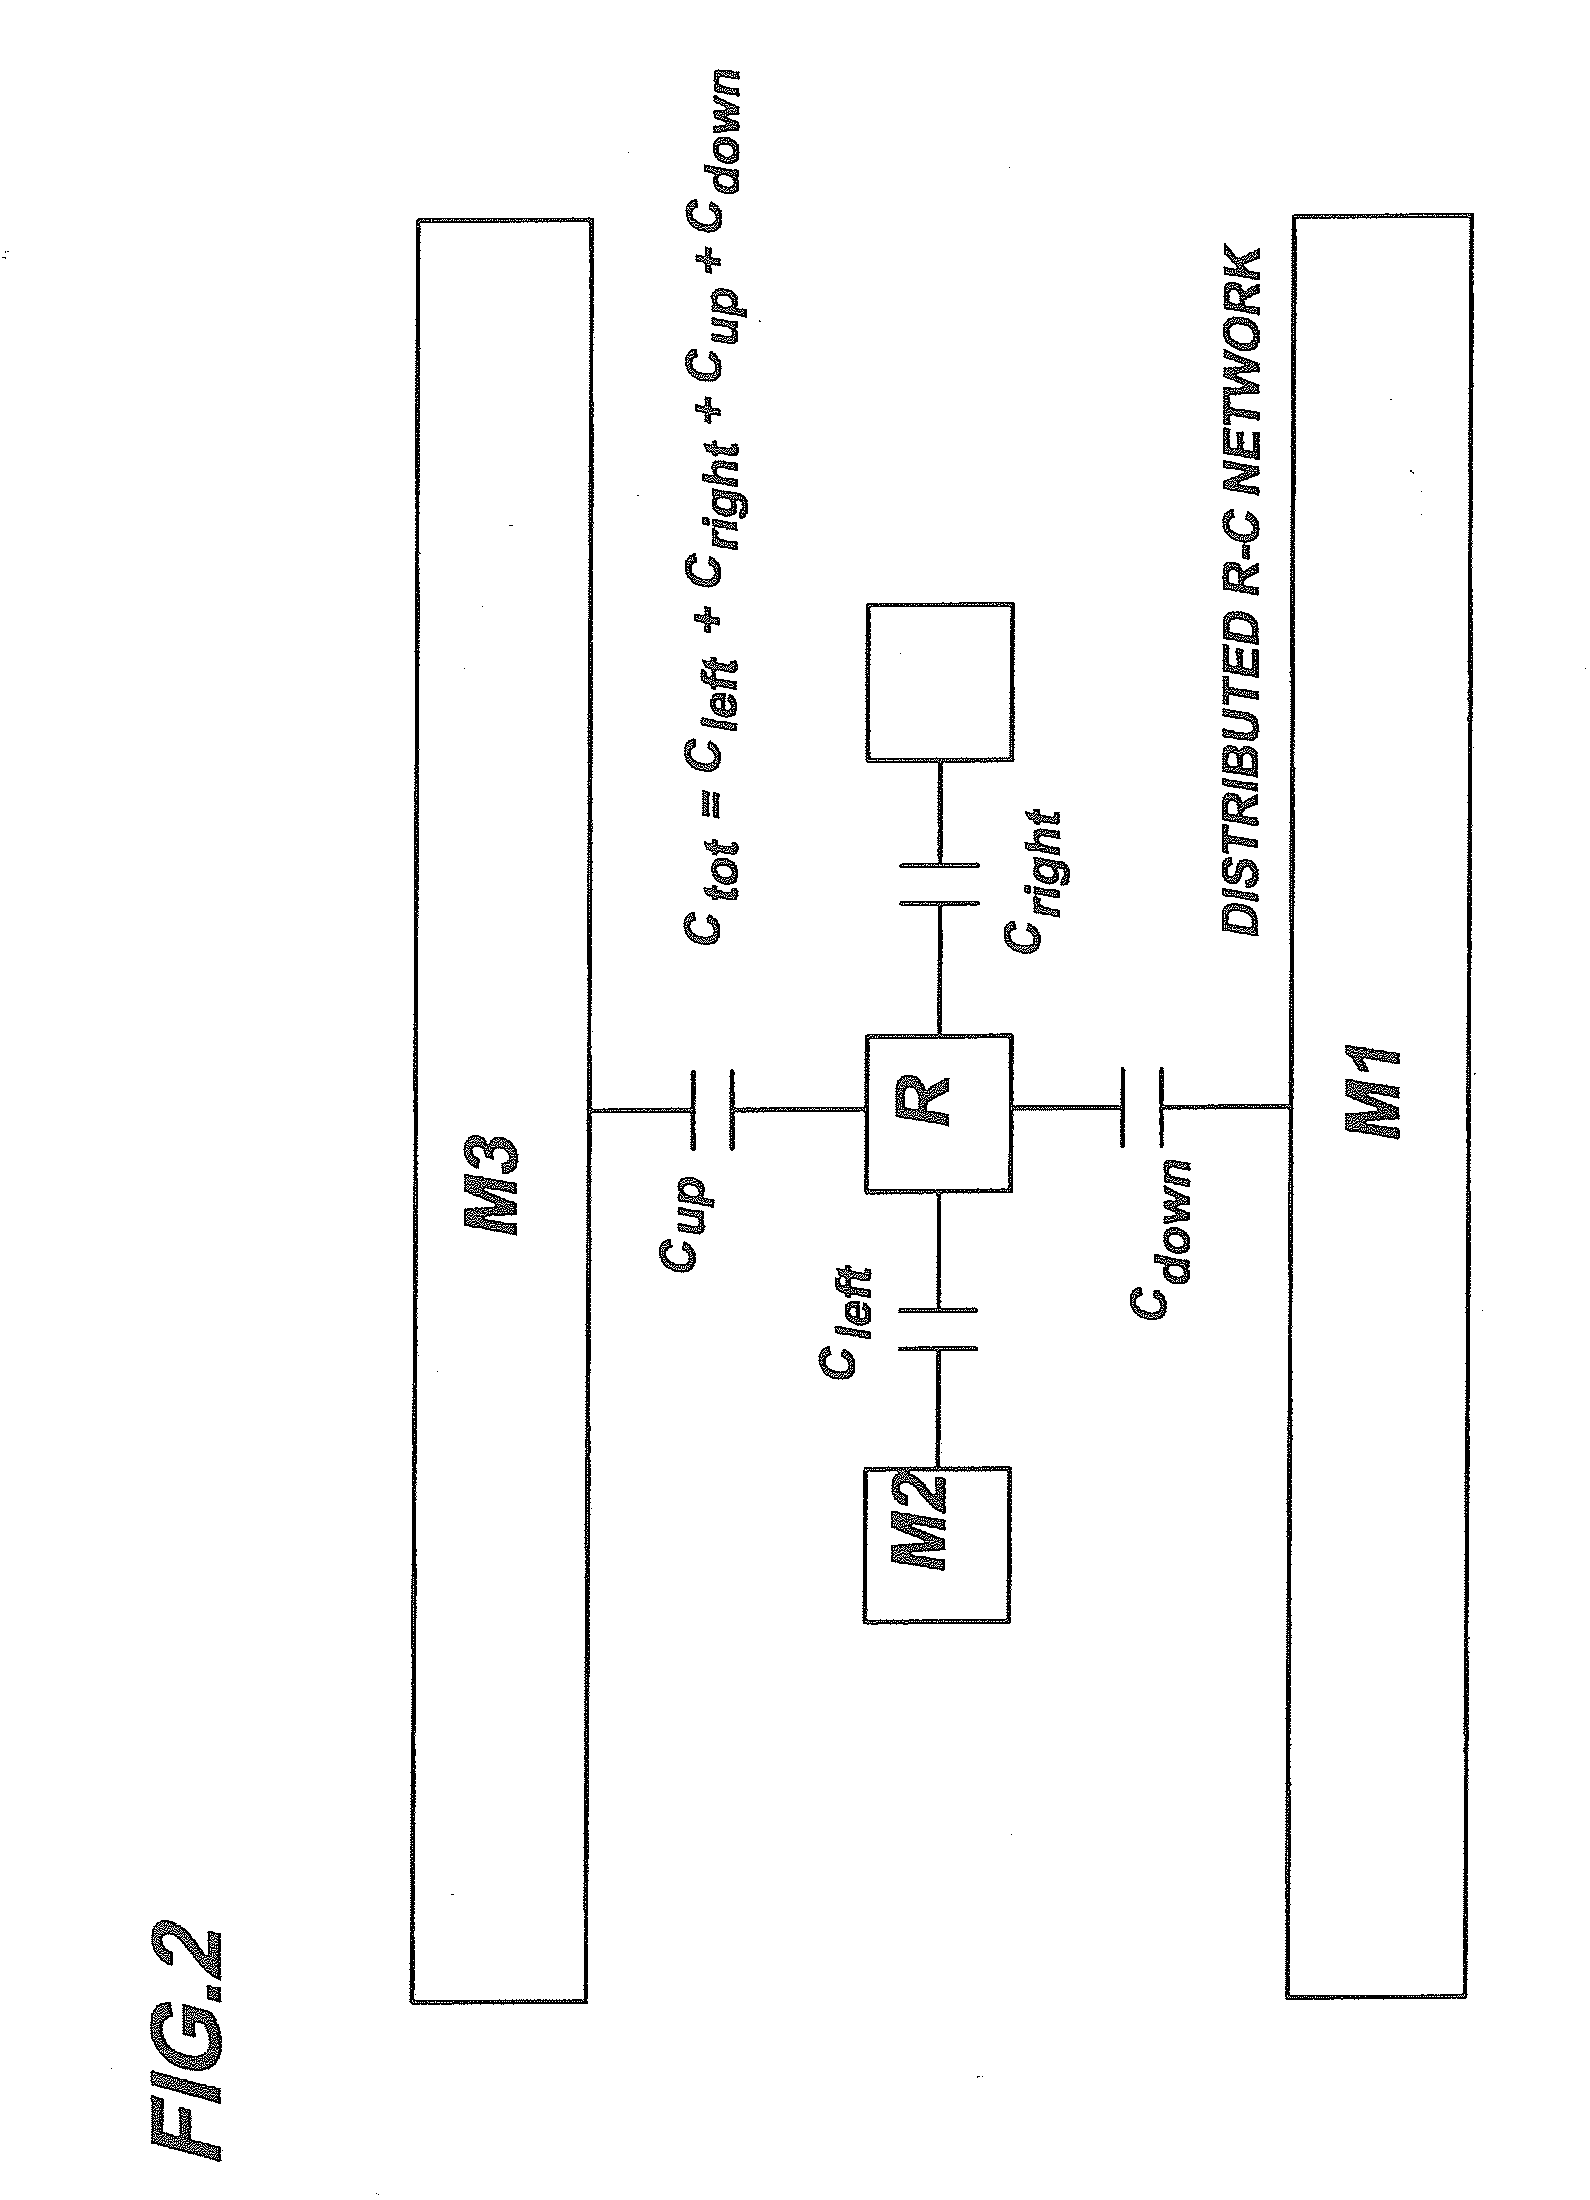 Method for treating parasitic resistance, capacitance, and inductance in the design flow of integrated circuit extraction, simulations, and analyses